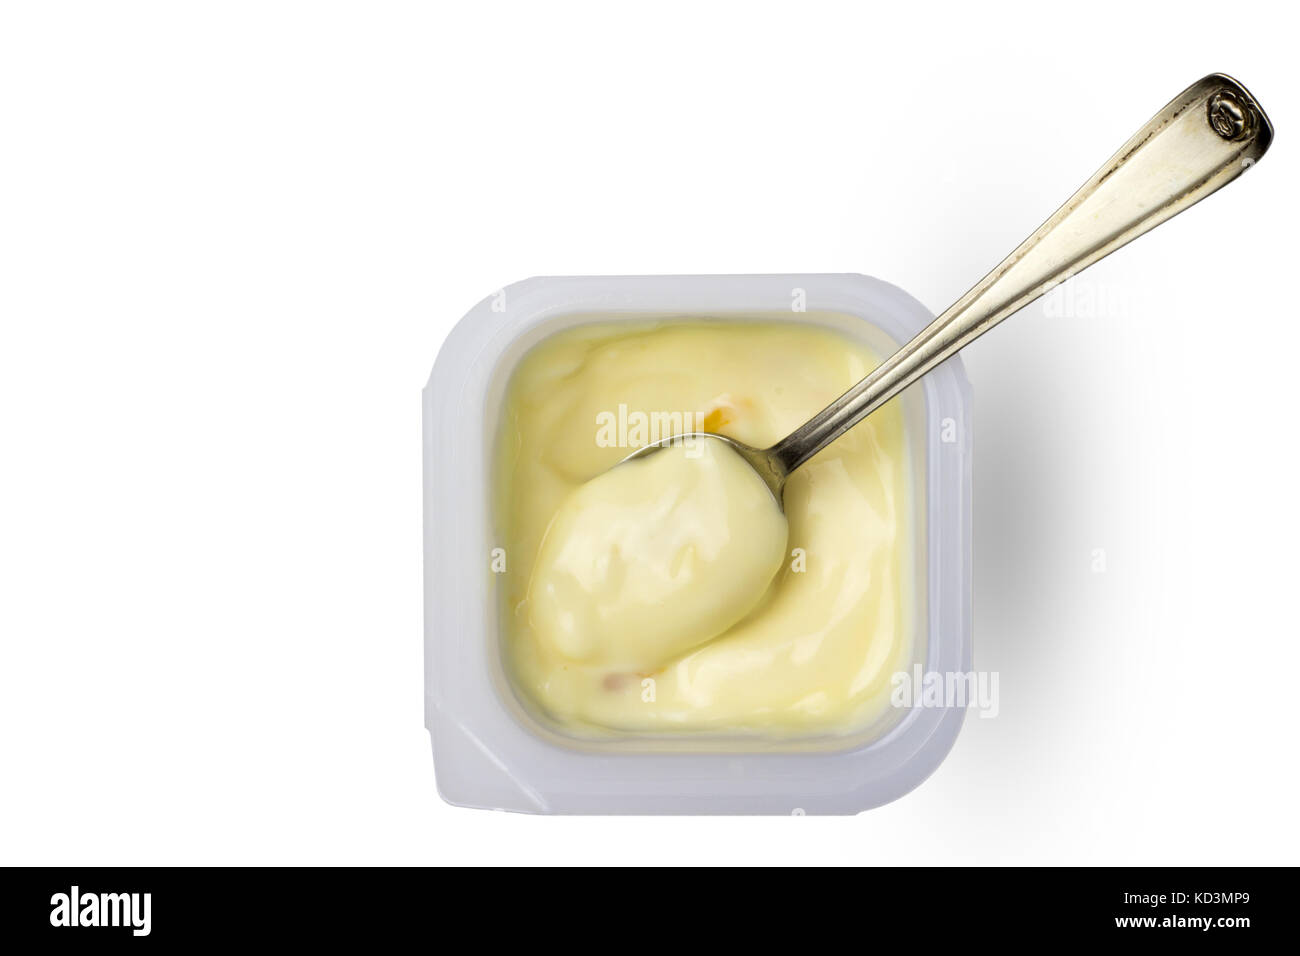 Creamy yellow apricot and peach yogurt in little plastic cup with small silver spoon - Top view image of fruit yoghurt in pot isolated on white backgr Stock Photo